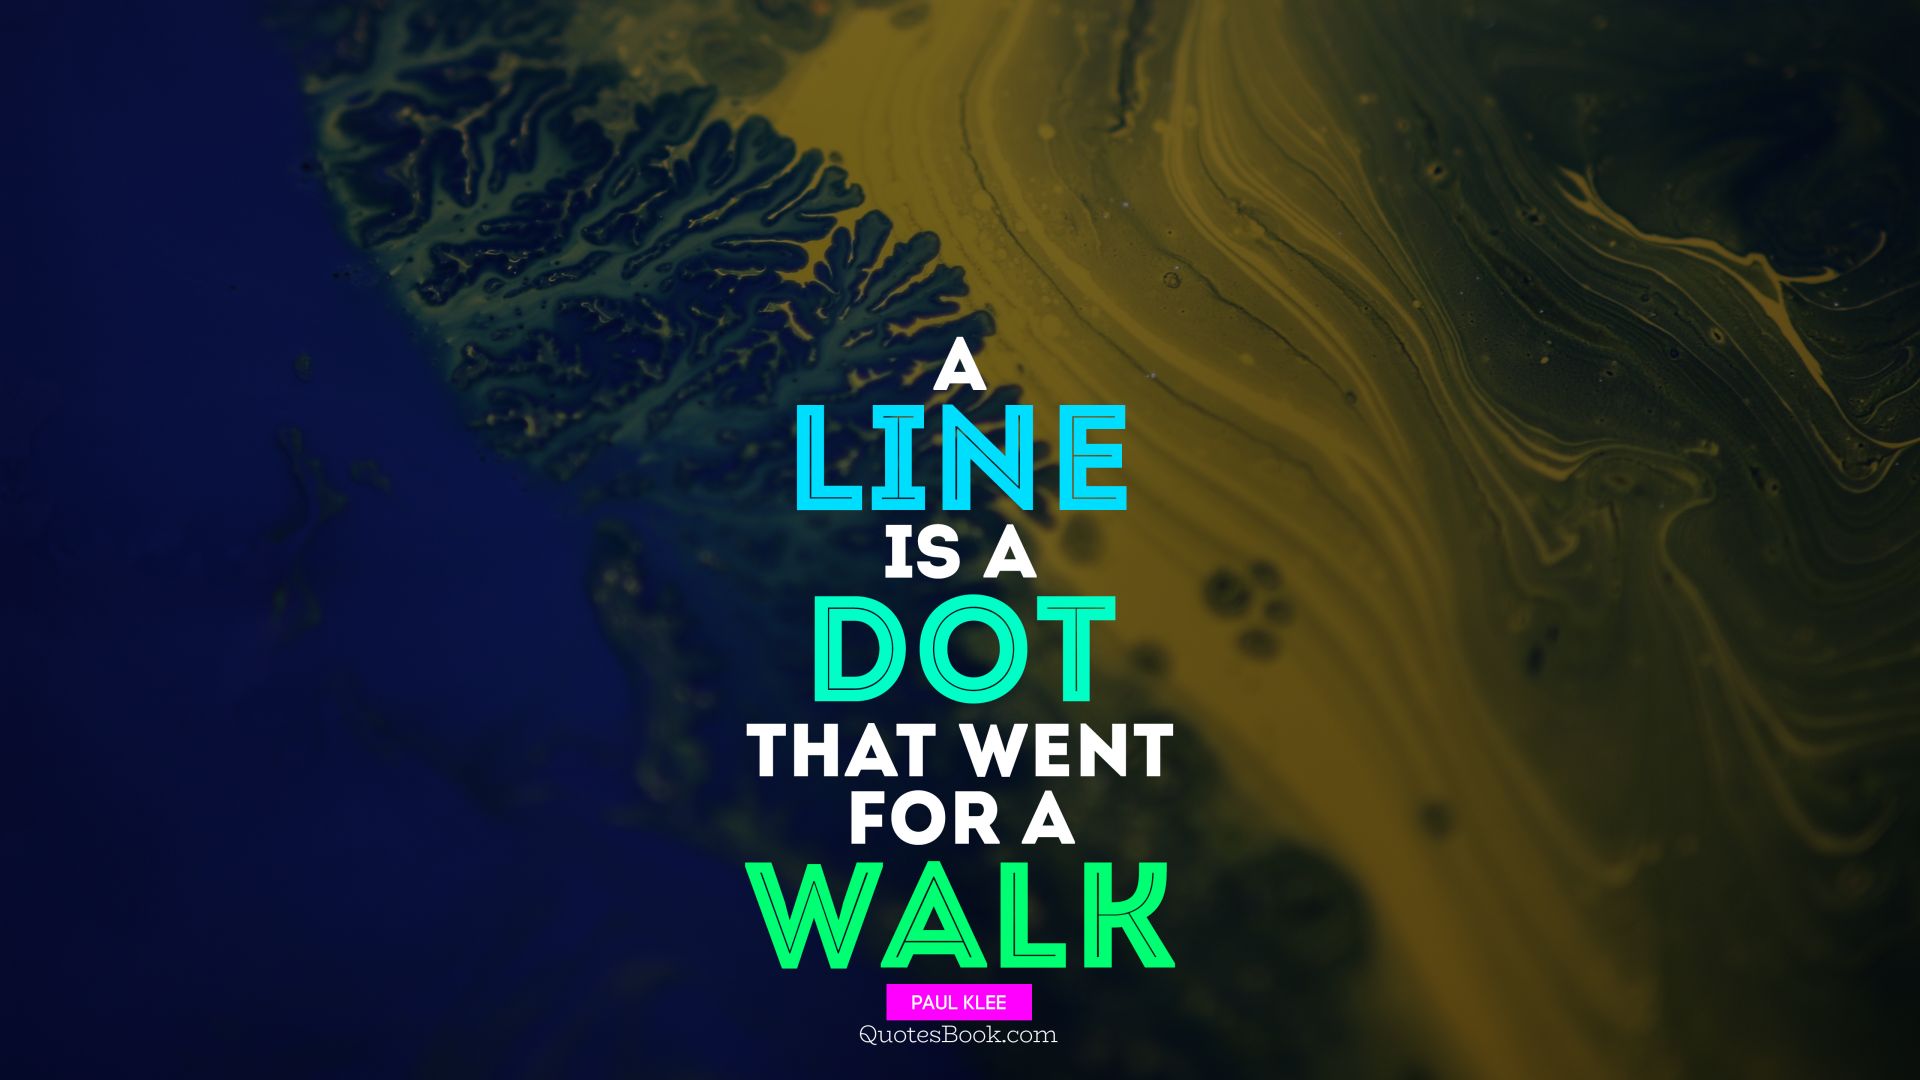 A line is a dot that went for a walk. - Quote by Paul Klee